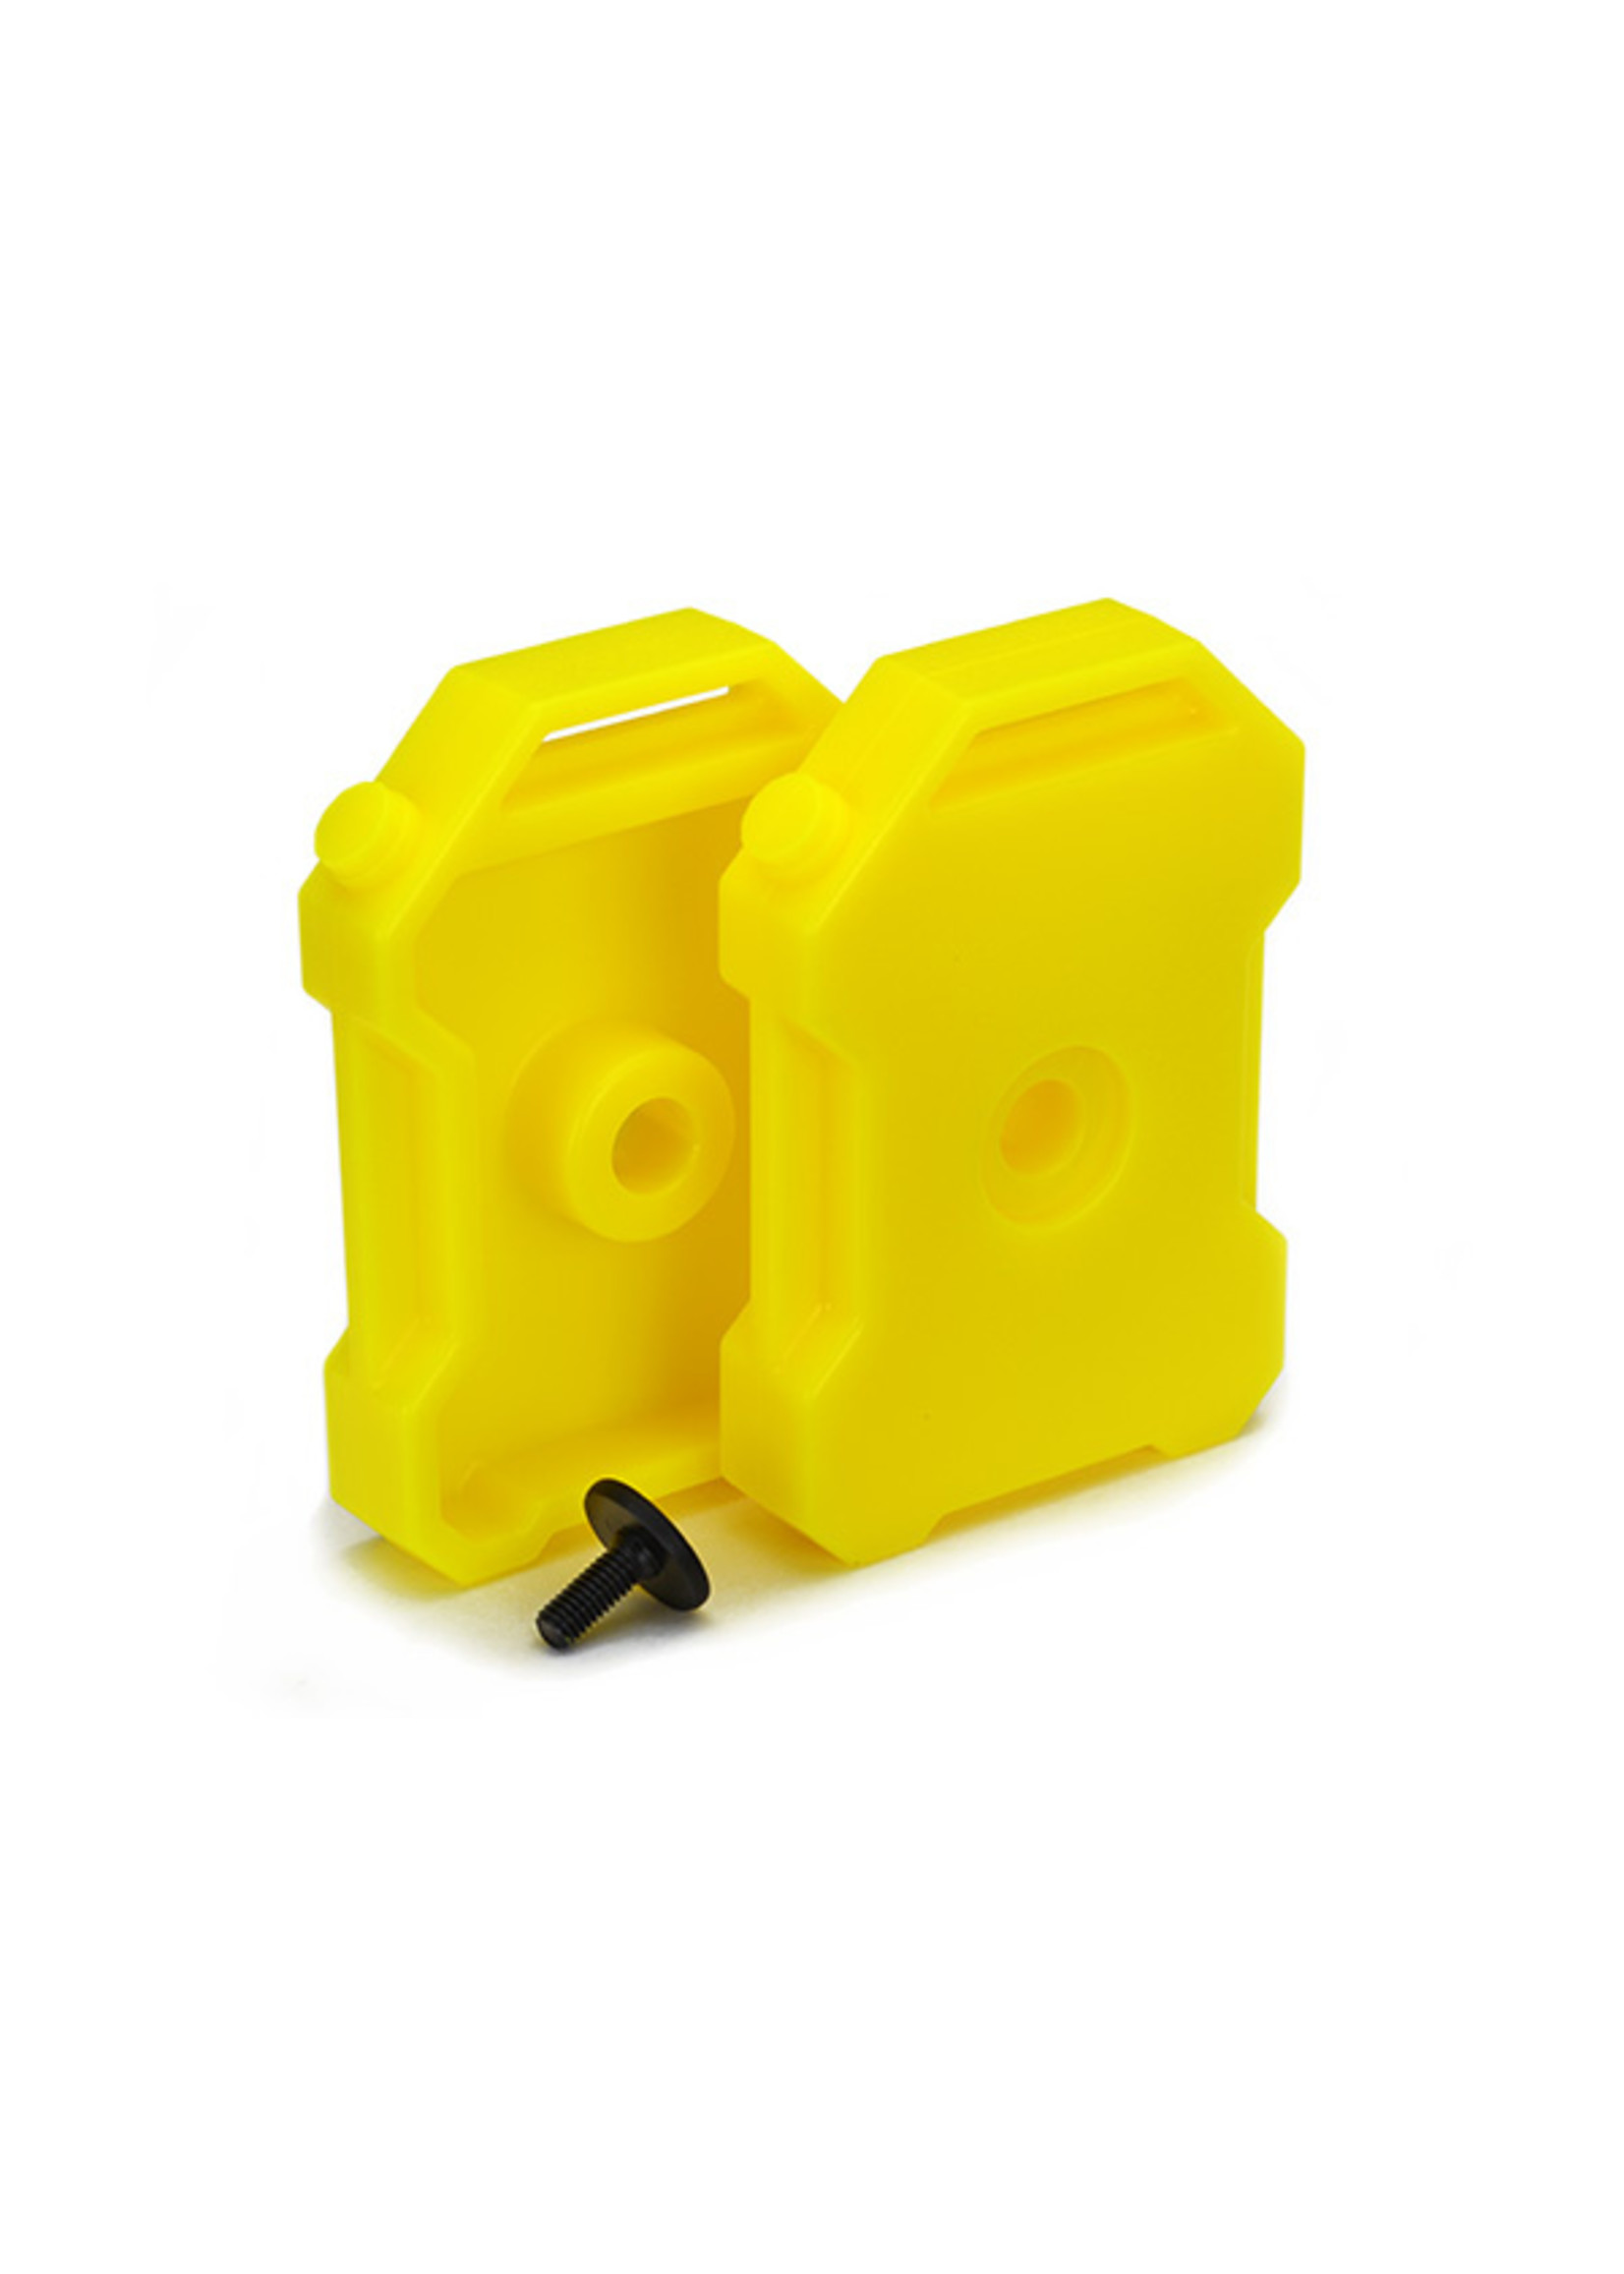 Traxxas 8022A - Fuel Canisters - Yellow